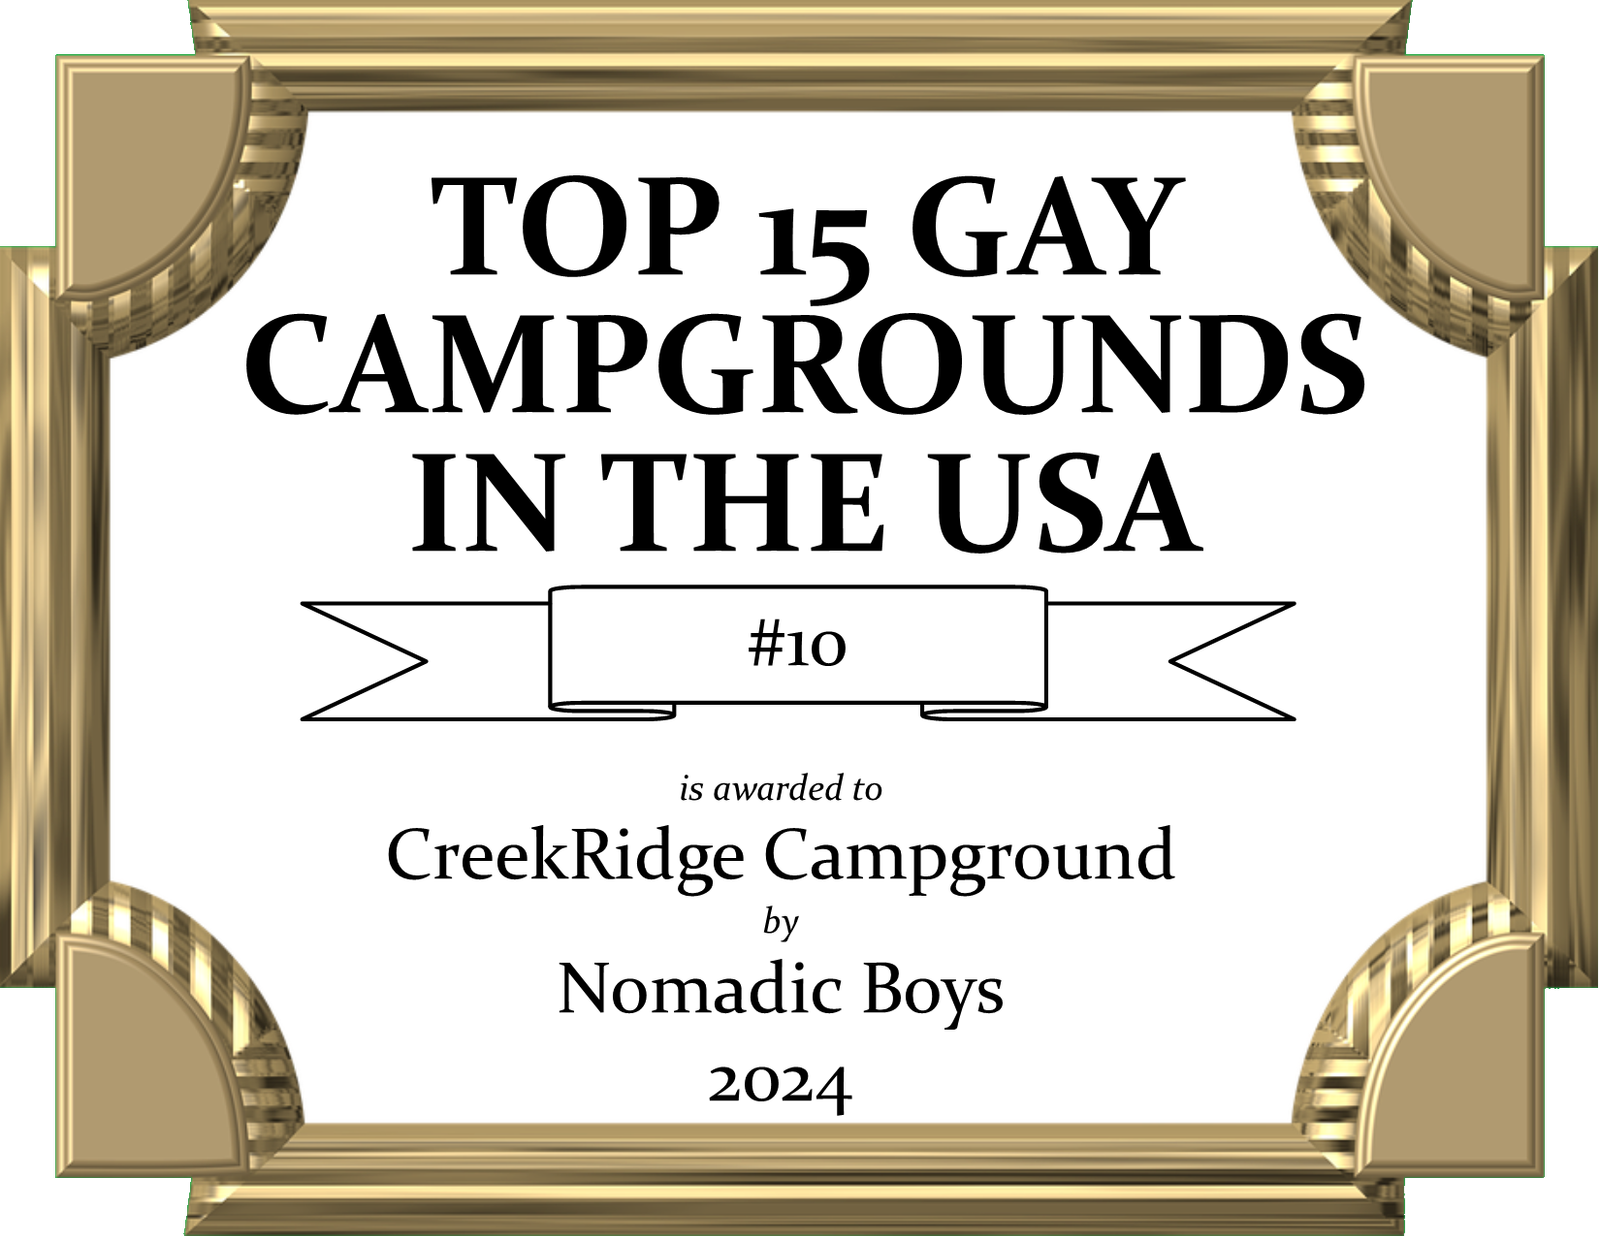 Top 15 Gay Campgrounds in America article by Nomadic Boys